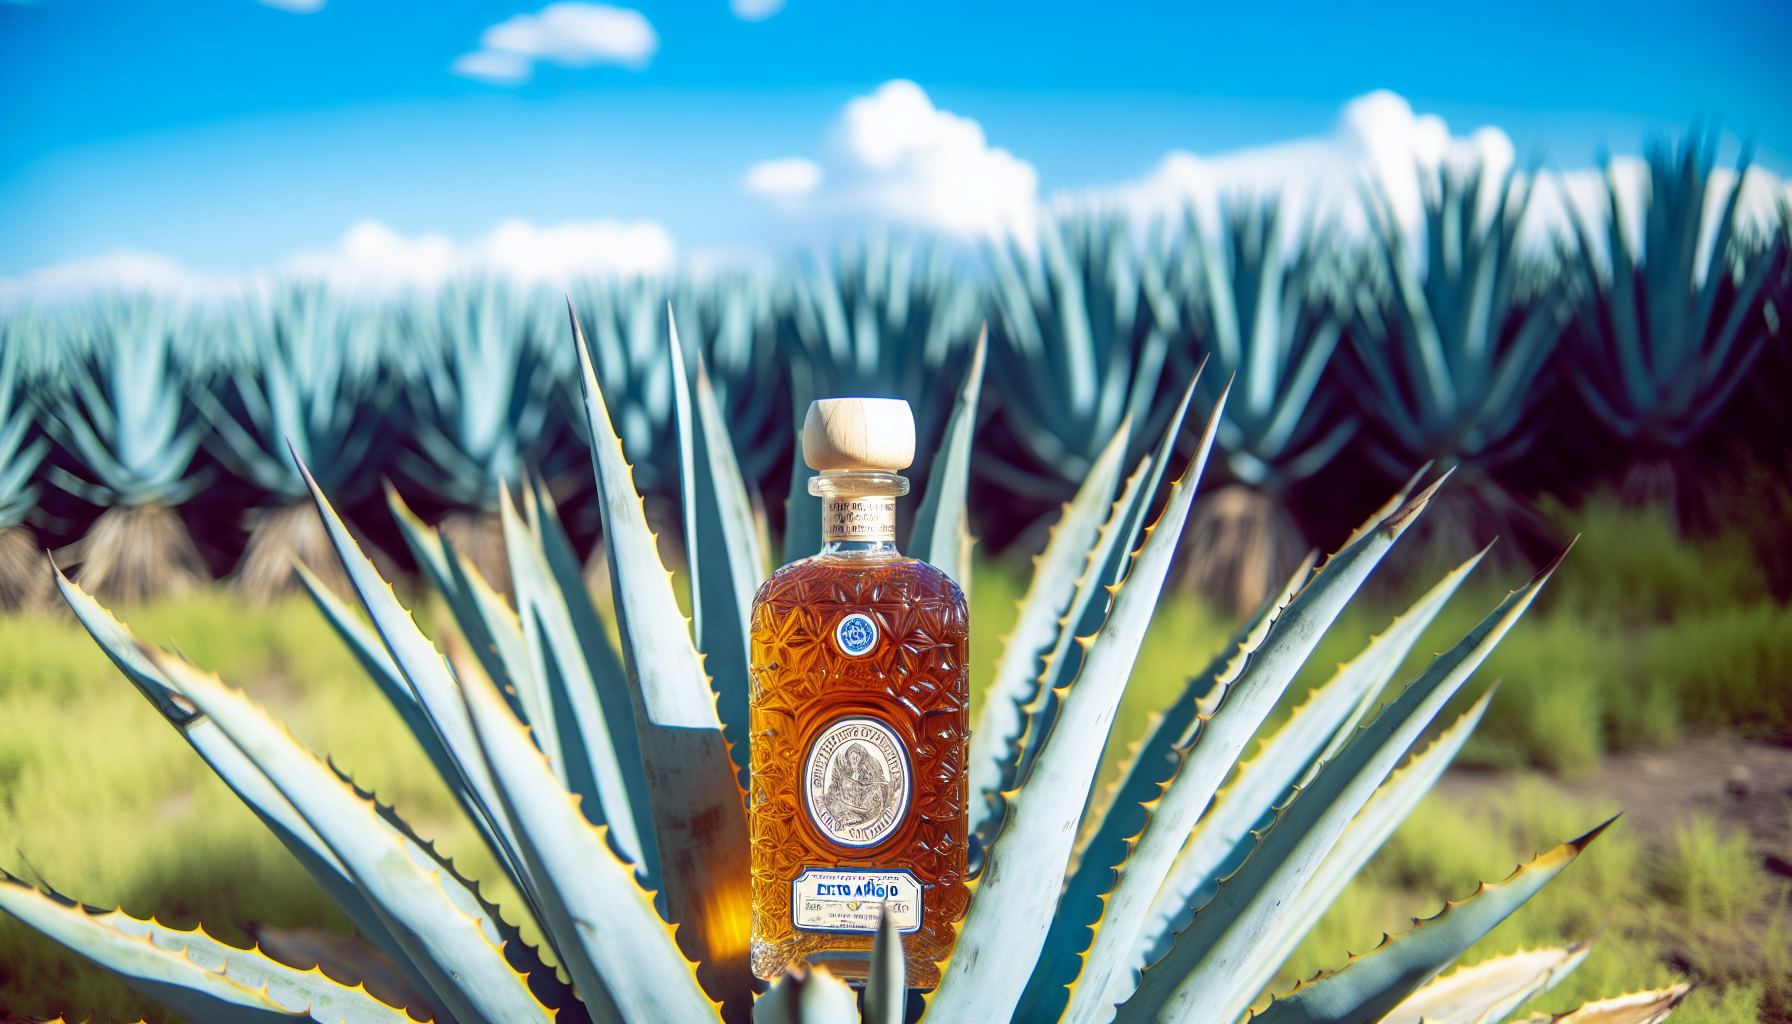 Bottle of extra añejo tequila surrounded by blue agave plants